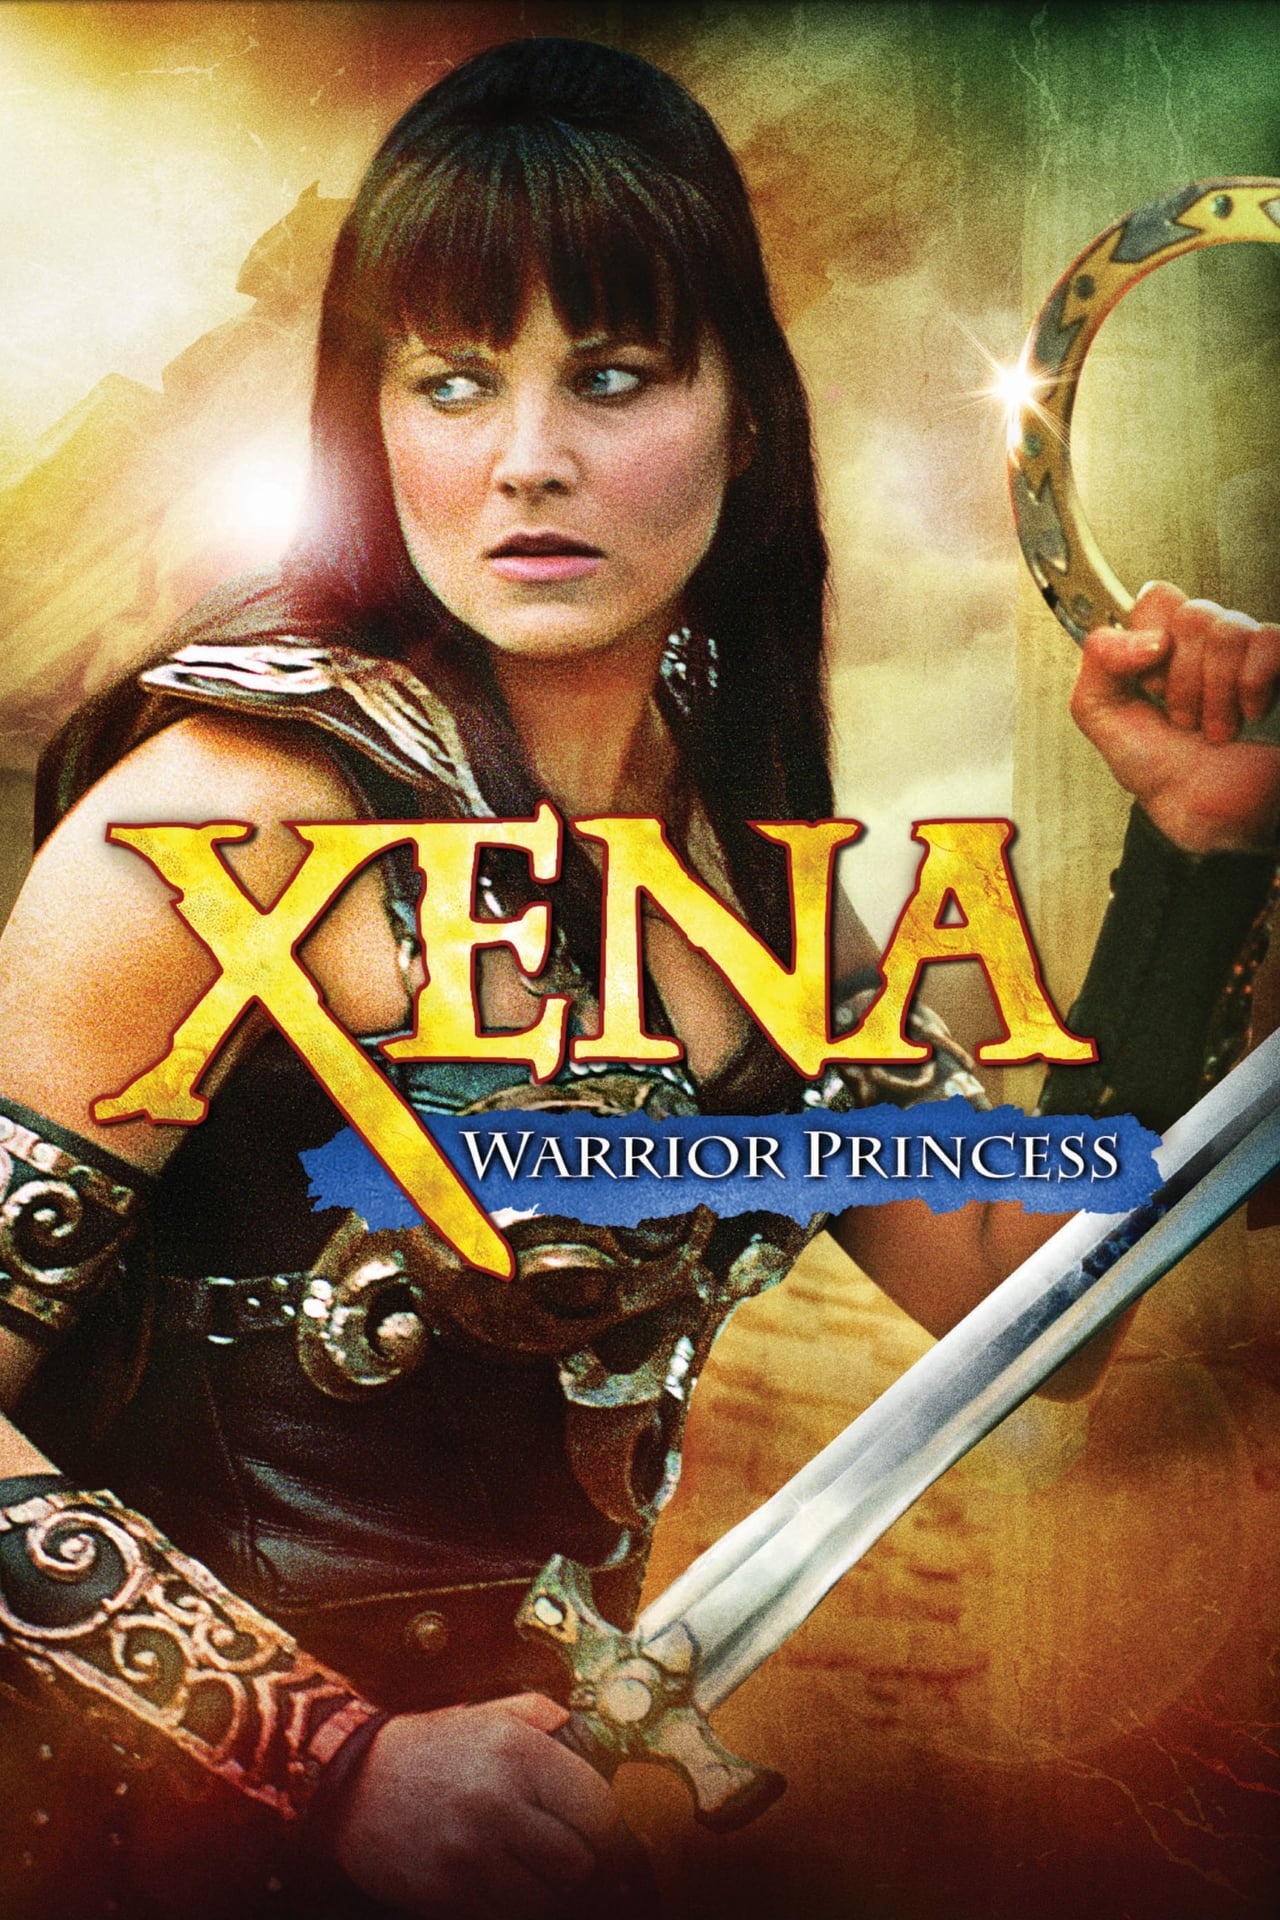 Xena: Warrior Princess (TV Series): A popular television show that aired in first-run syndication from 1995 to 2001. 1280x1920 HD Wallpaper.